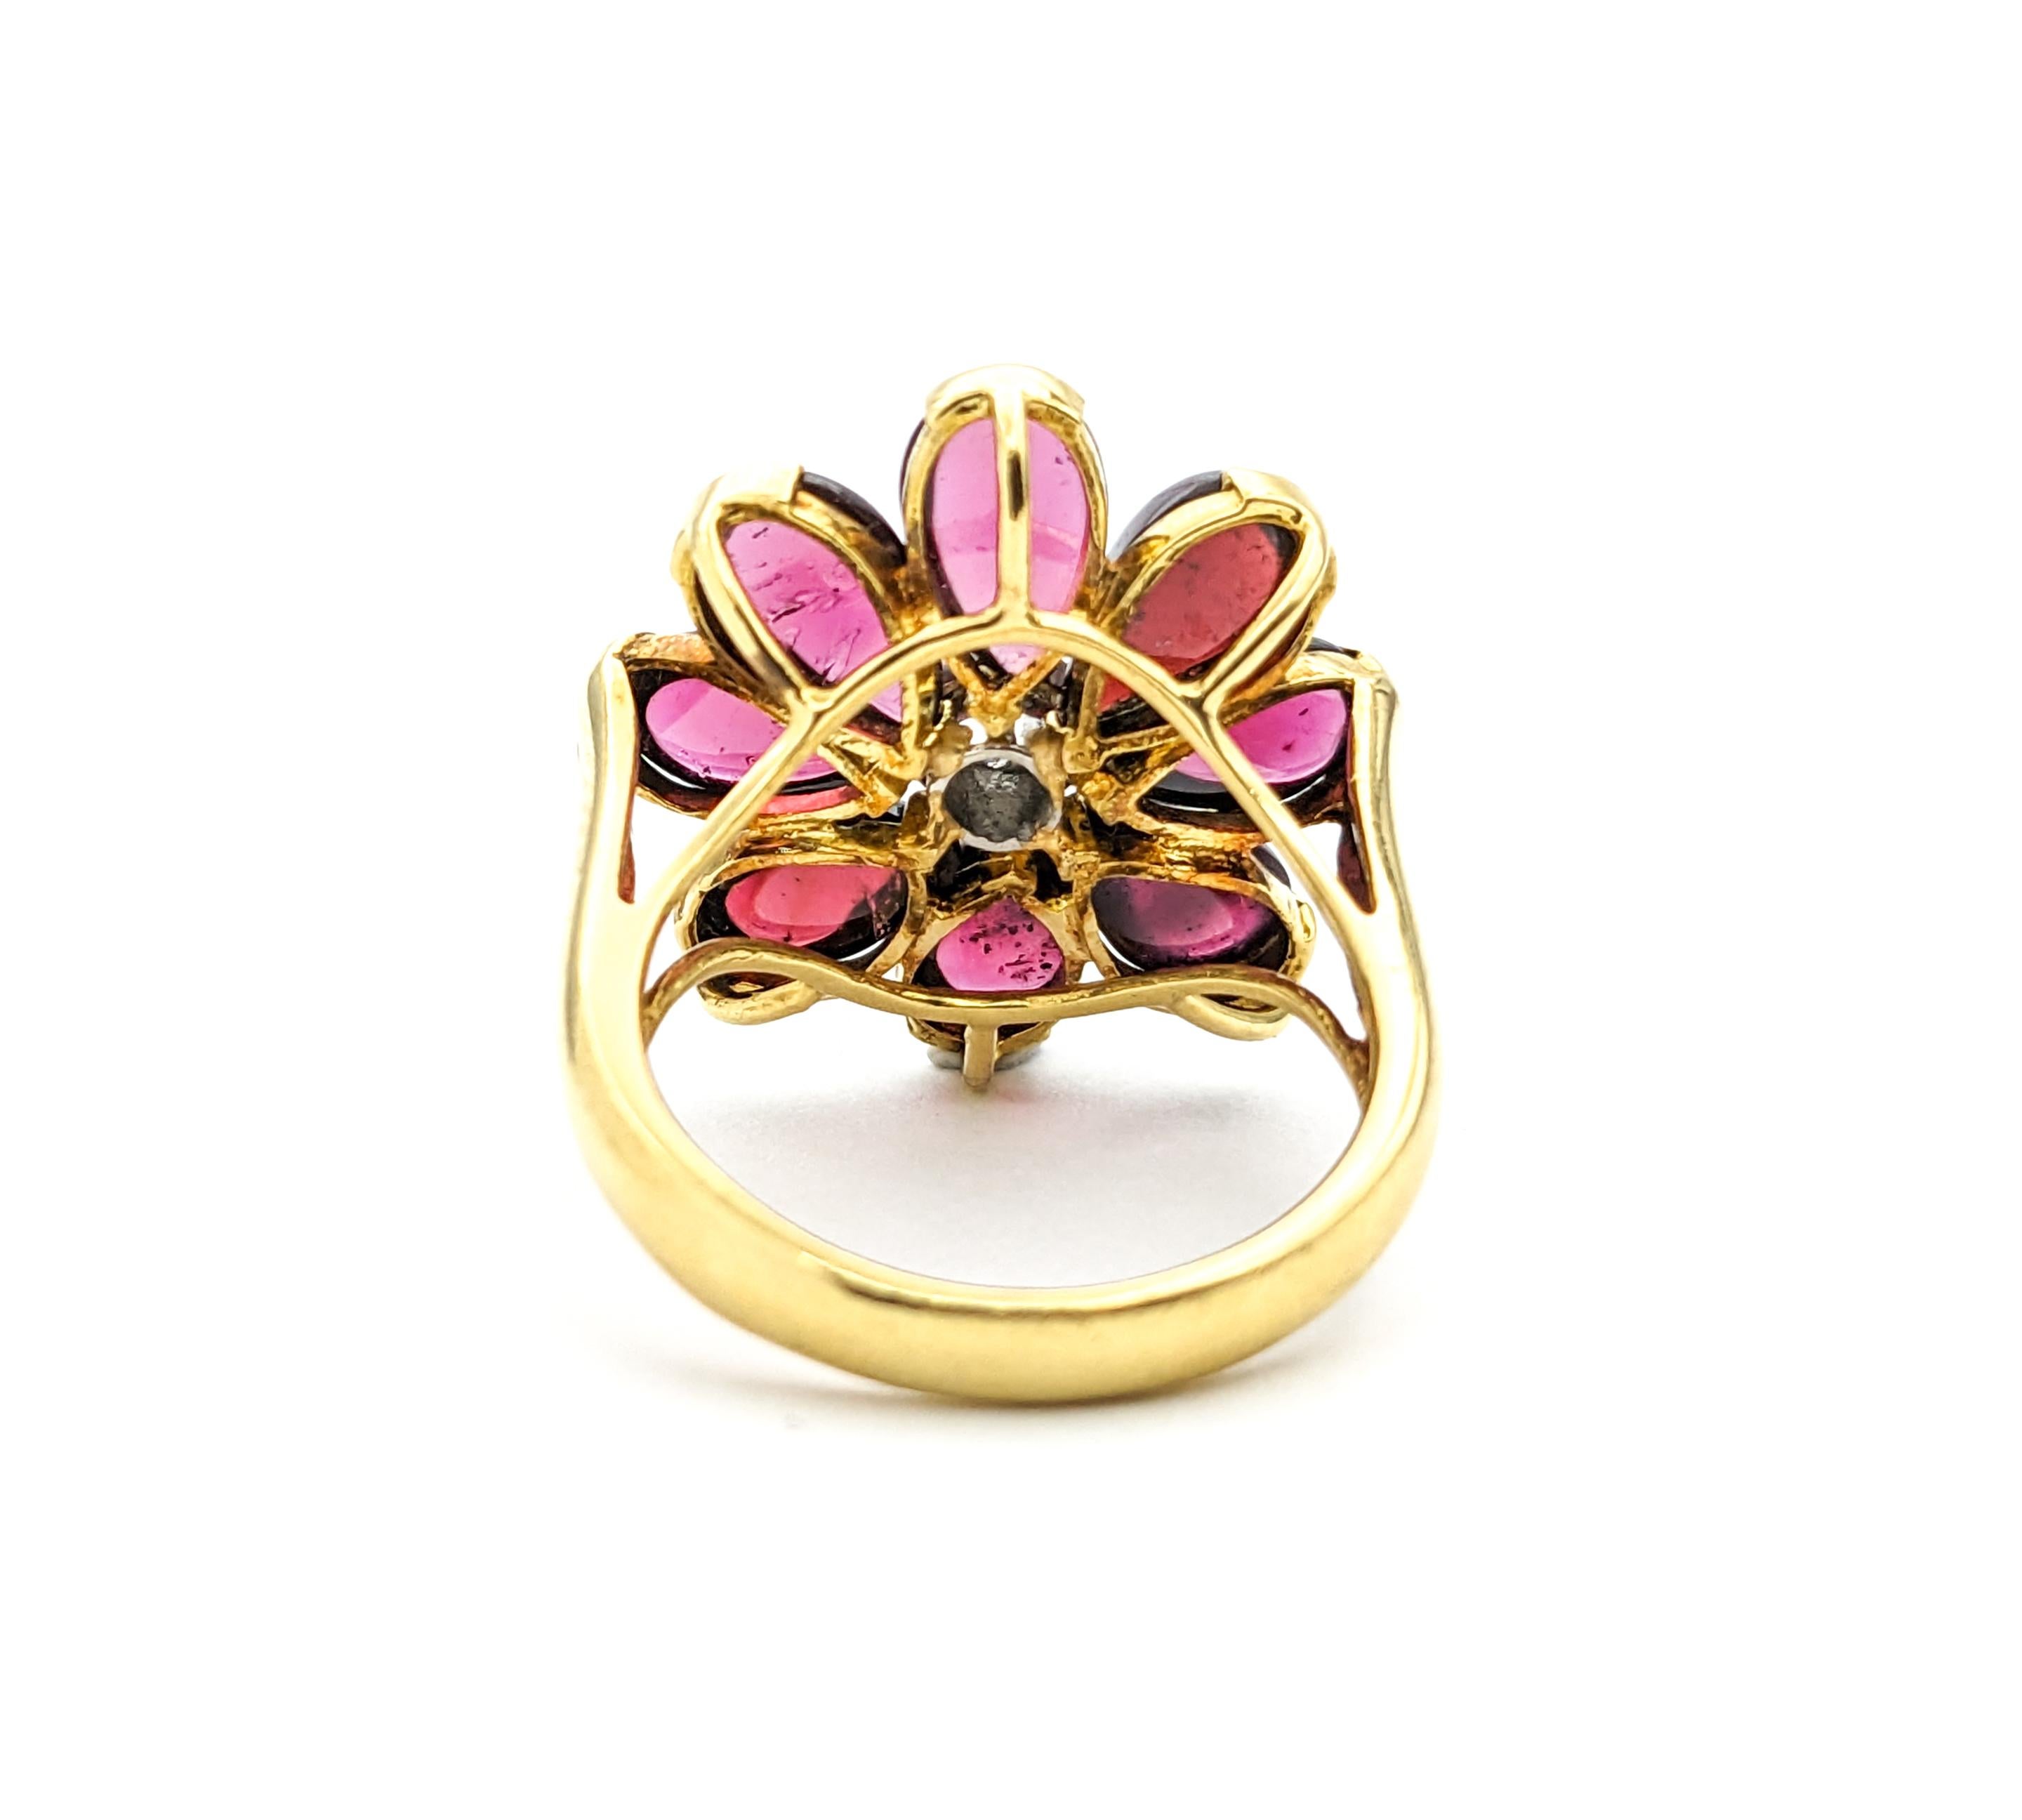 6ctw Pink Tourmaline Cabochon & Diamond Flower Ring In Yellow Gold For Sale 5